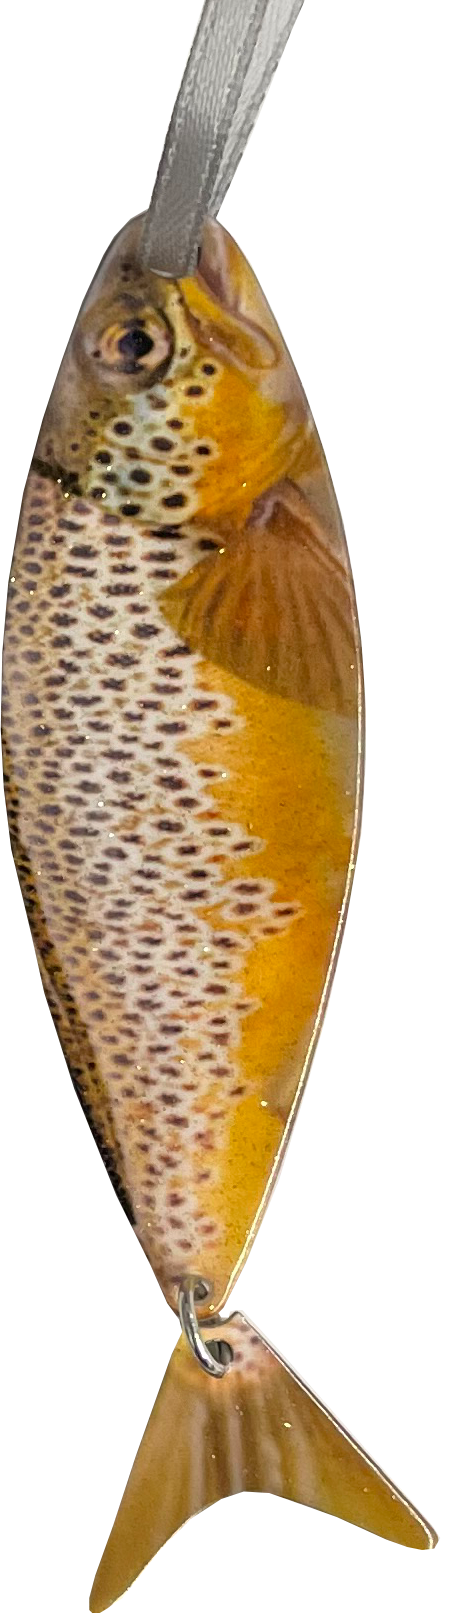 Brown Trout Ornament 4 inch #8345 by d'ears